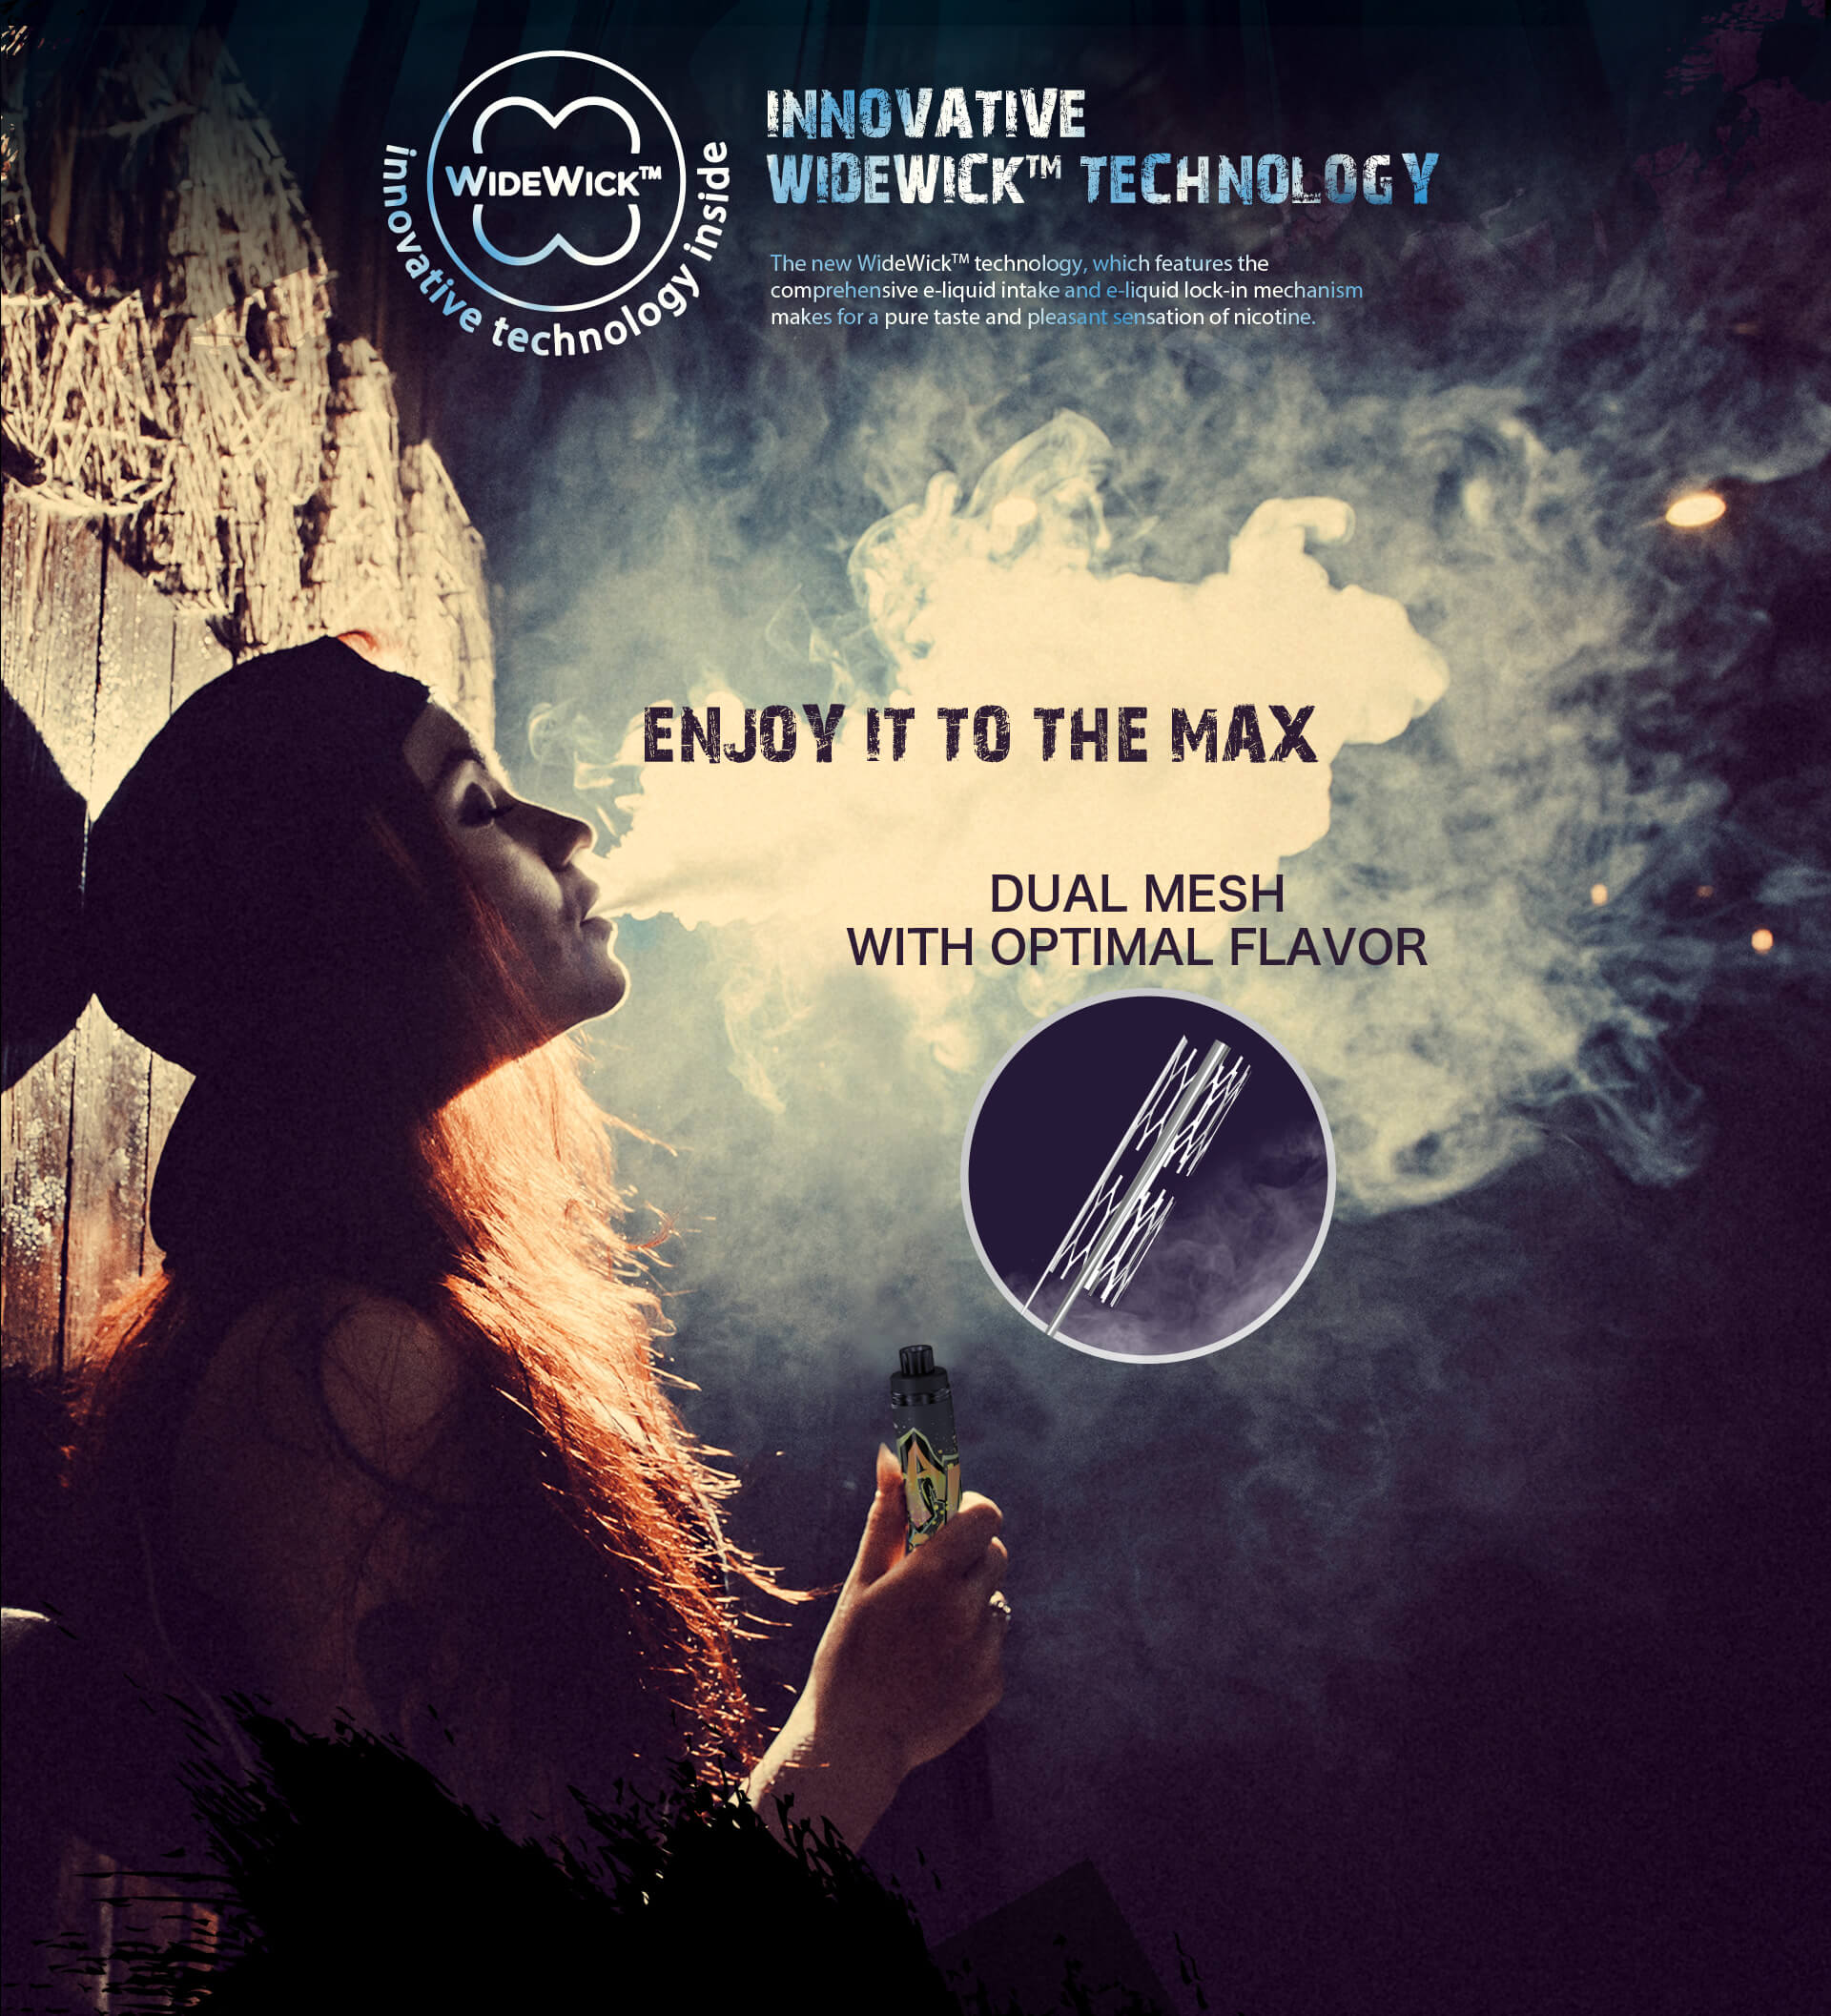 The VAAL Max comes with the innovative WideWick wicking technology, which supports stable and consistent vaping experience. The 0.7ohm dual mesh coil provides huge clouds of vaping, making it special among the disposables in the market.